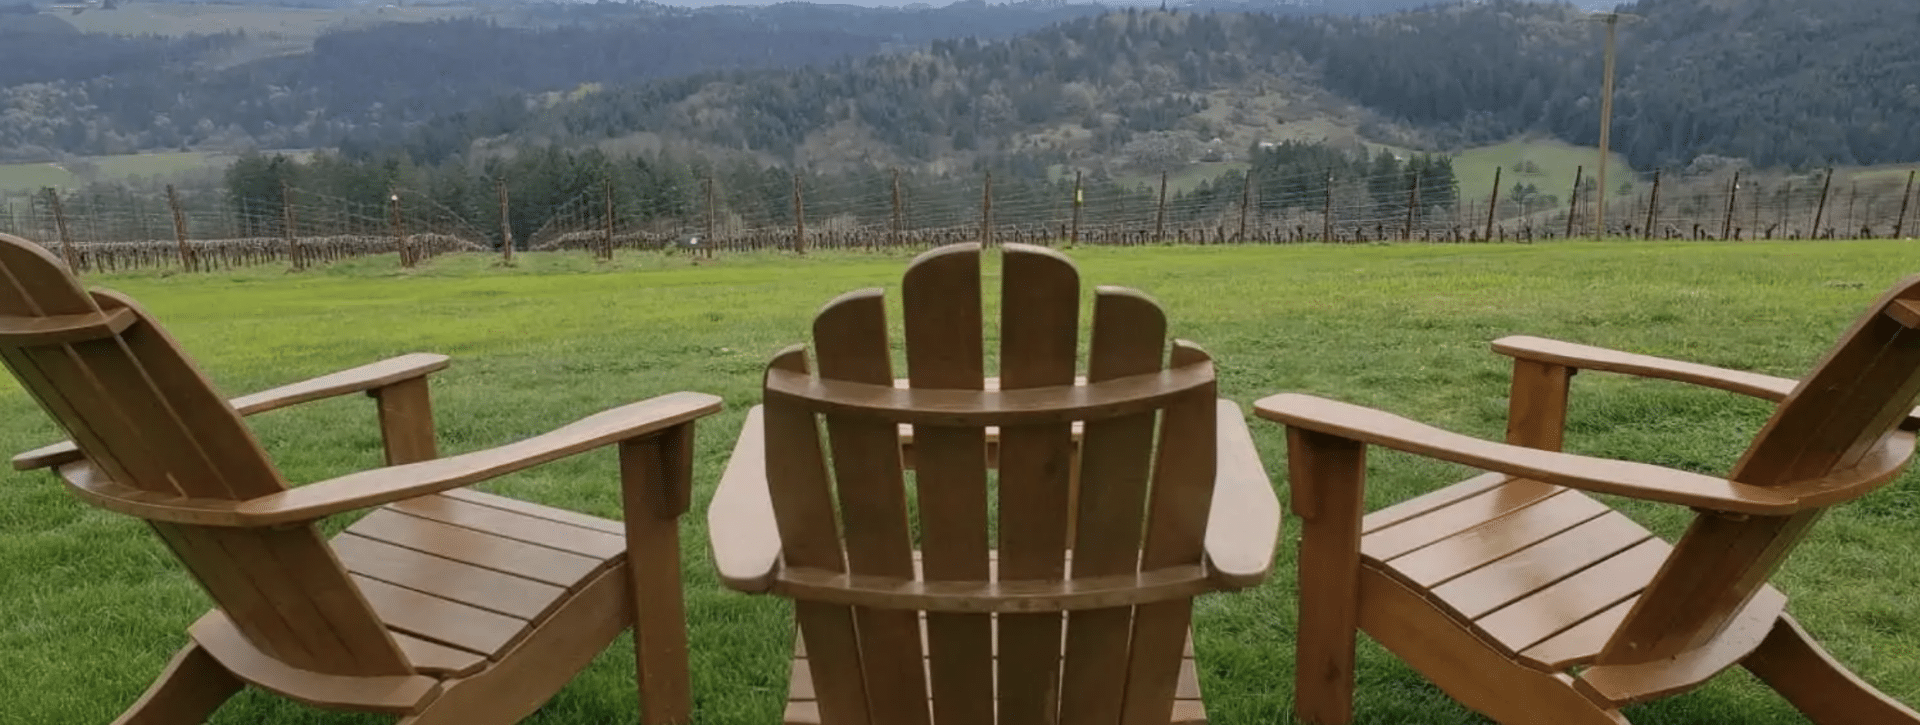 two Adirondack chair overlooking a green Valley